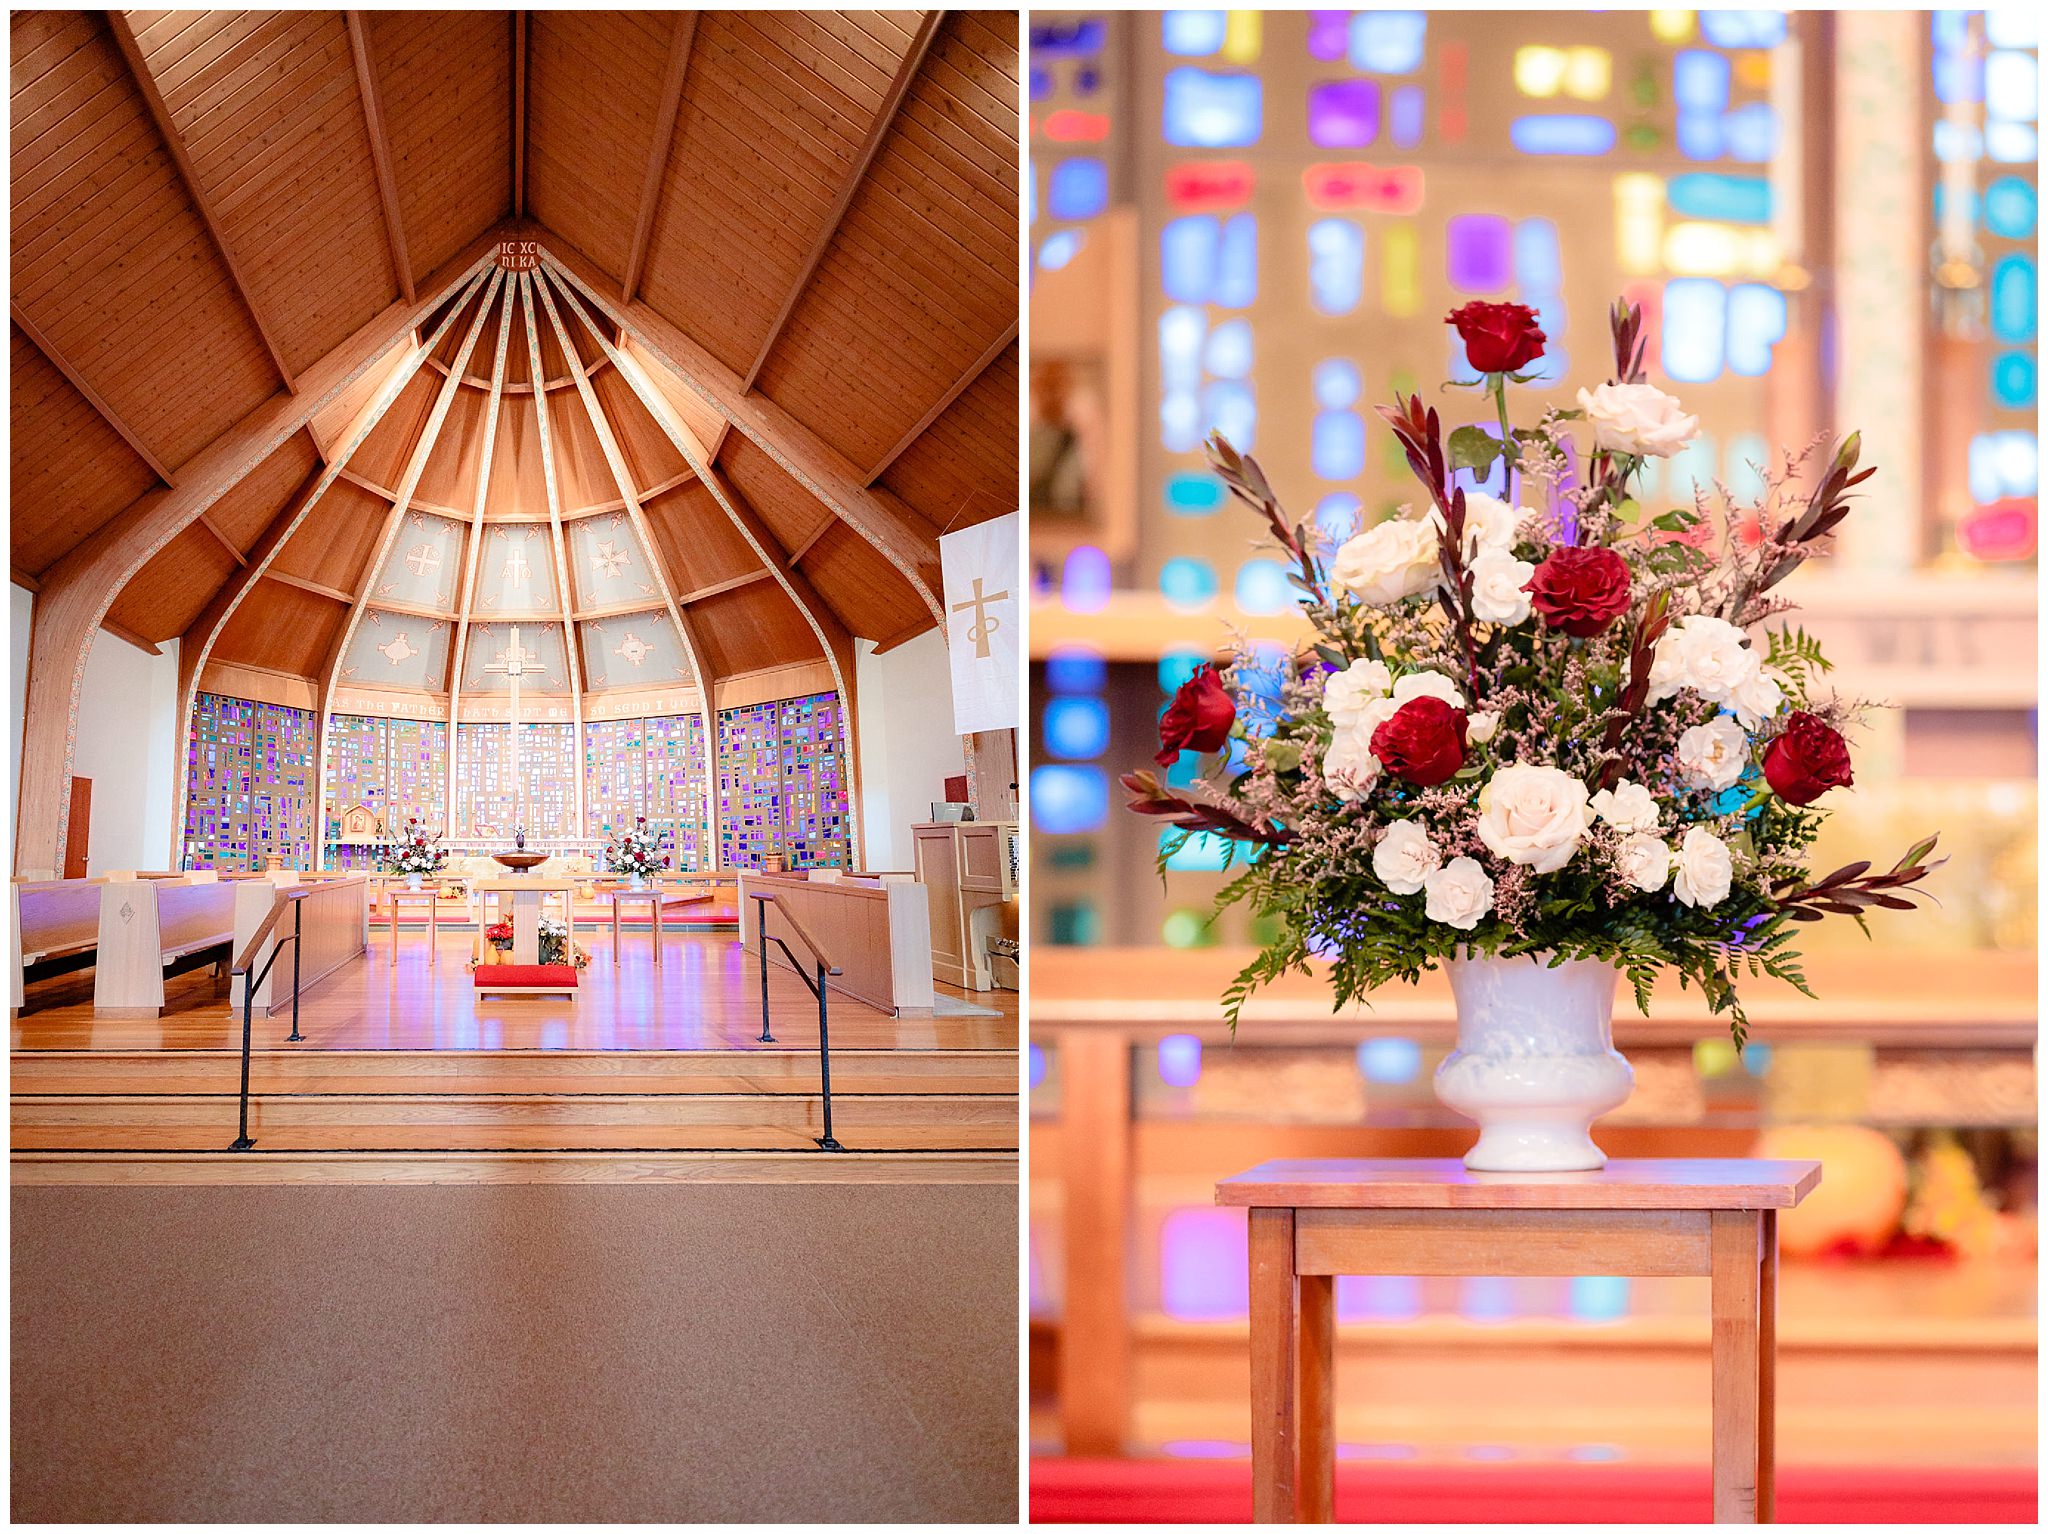 Zion Lutheran Church in Penn Hills decorated for a November wedding